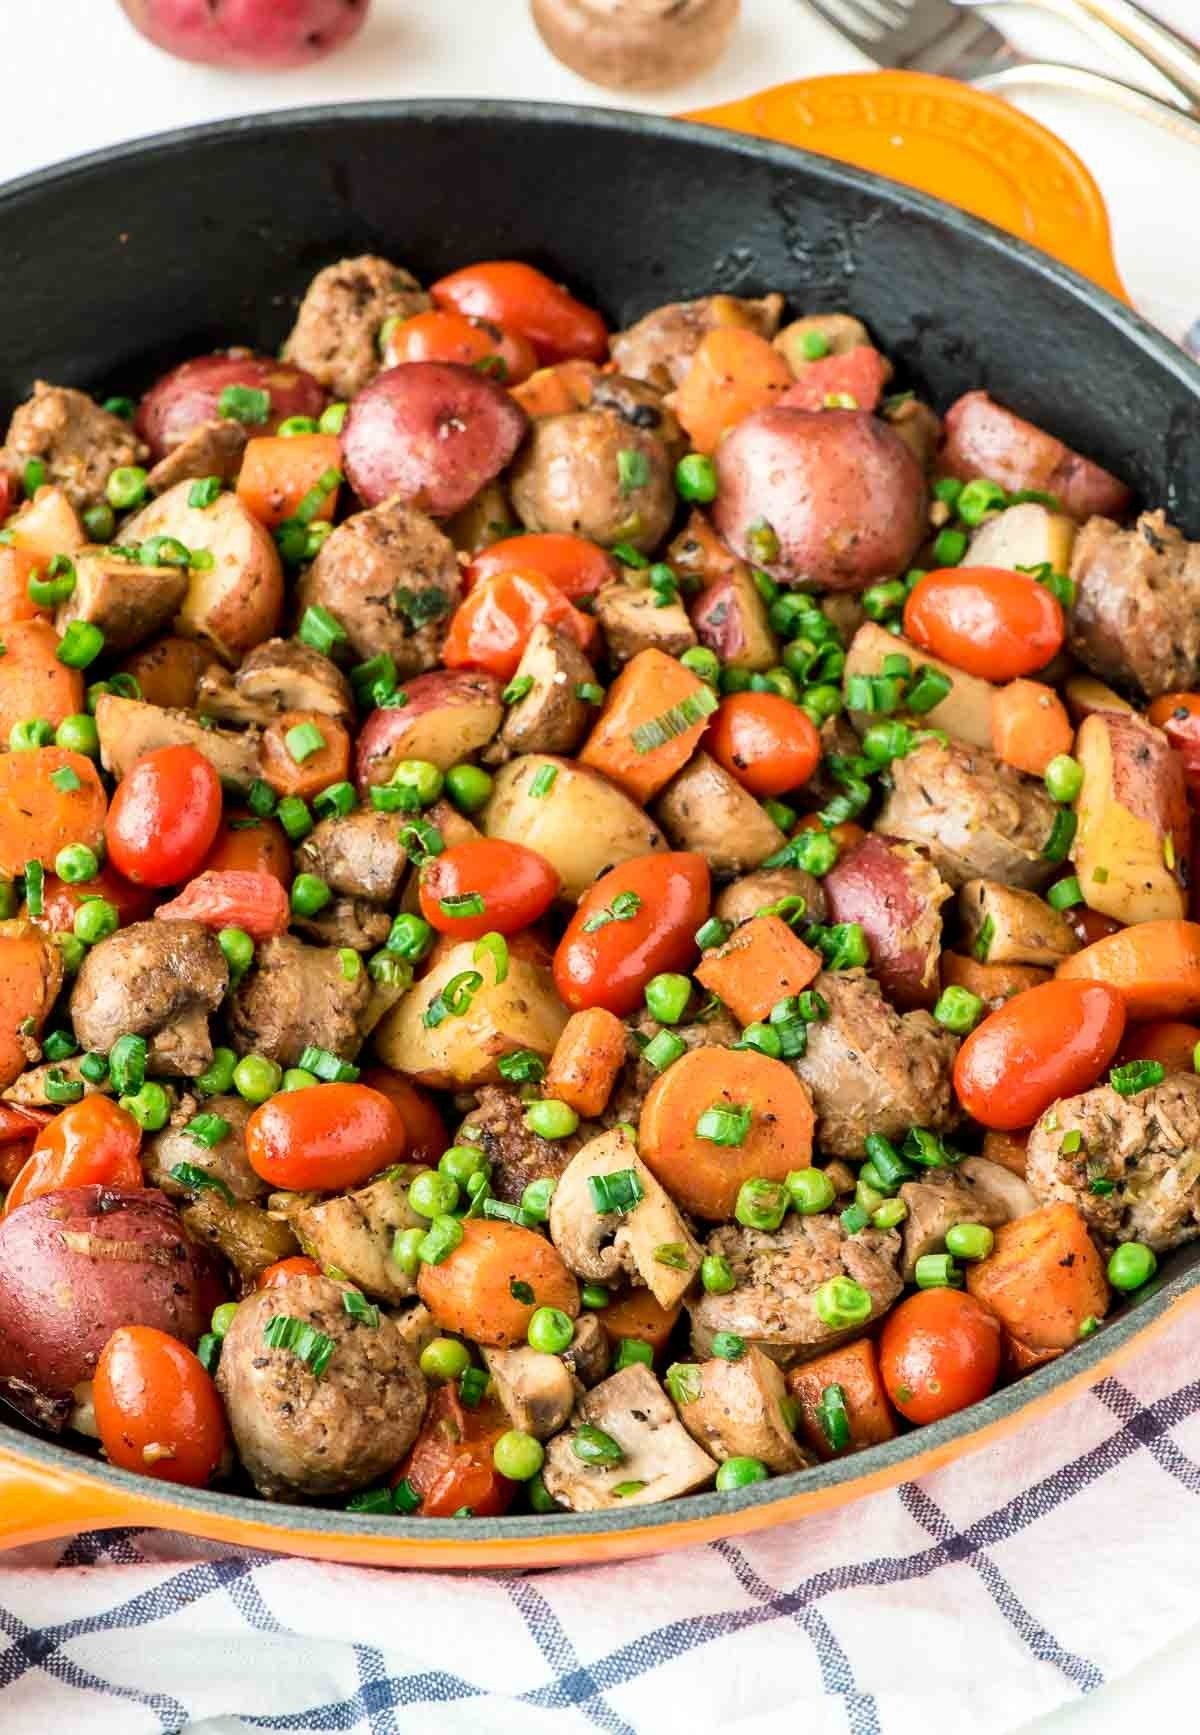 10 Elegant Dinner Ideas With Italian Sausage italian sausage skillet with vegetables and potatoes 2022